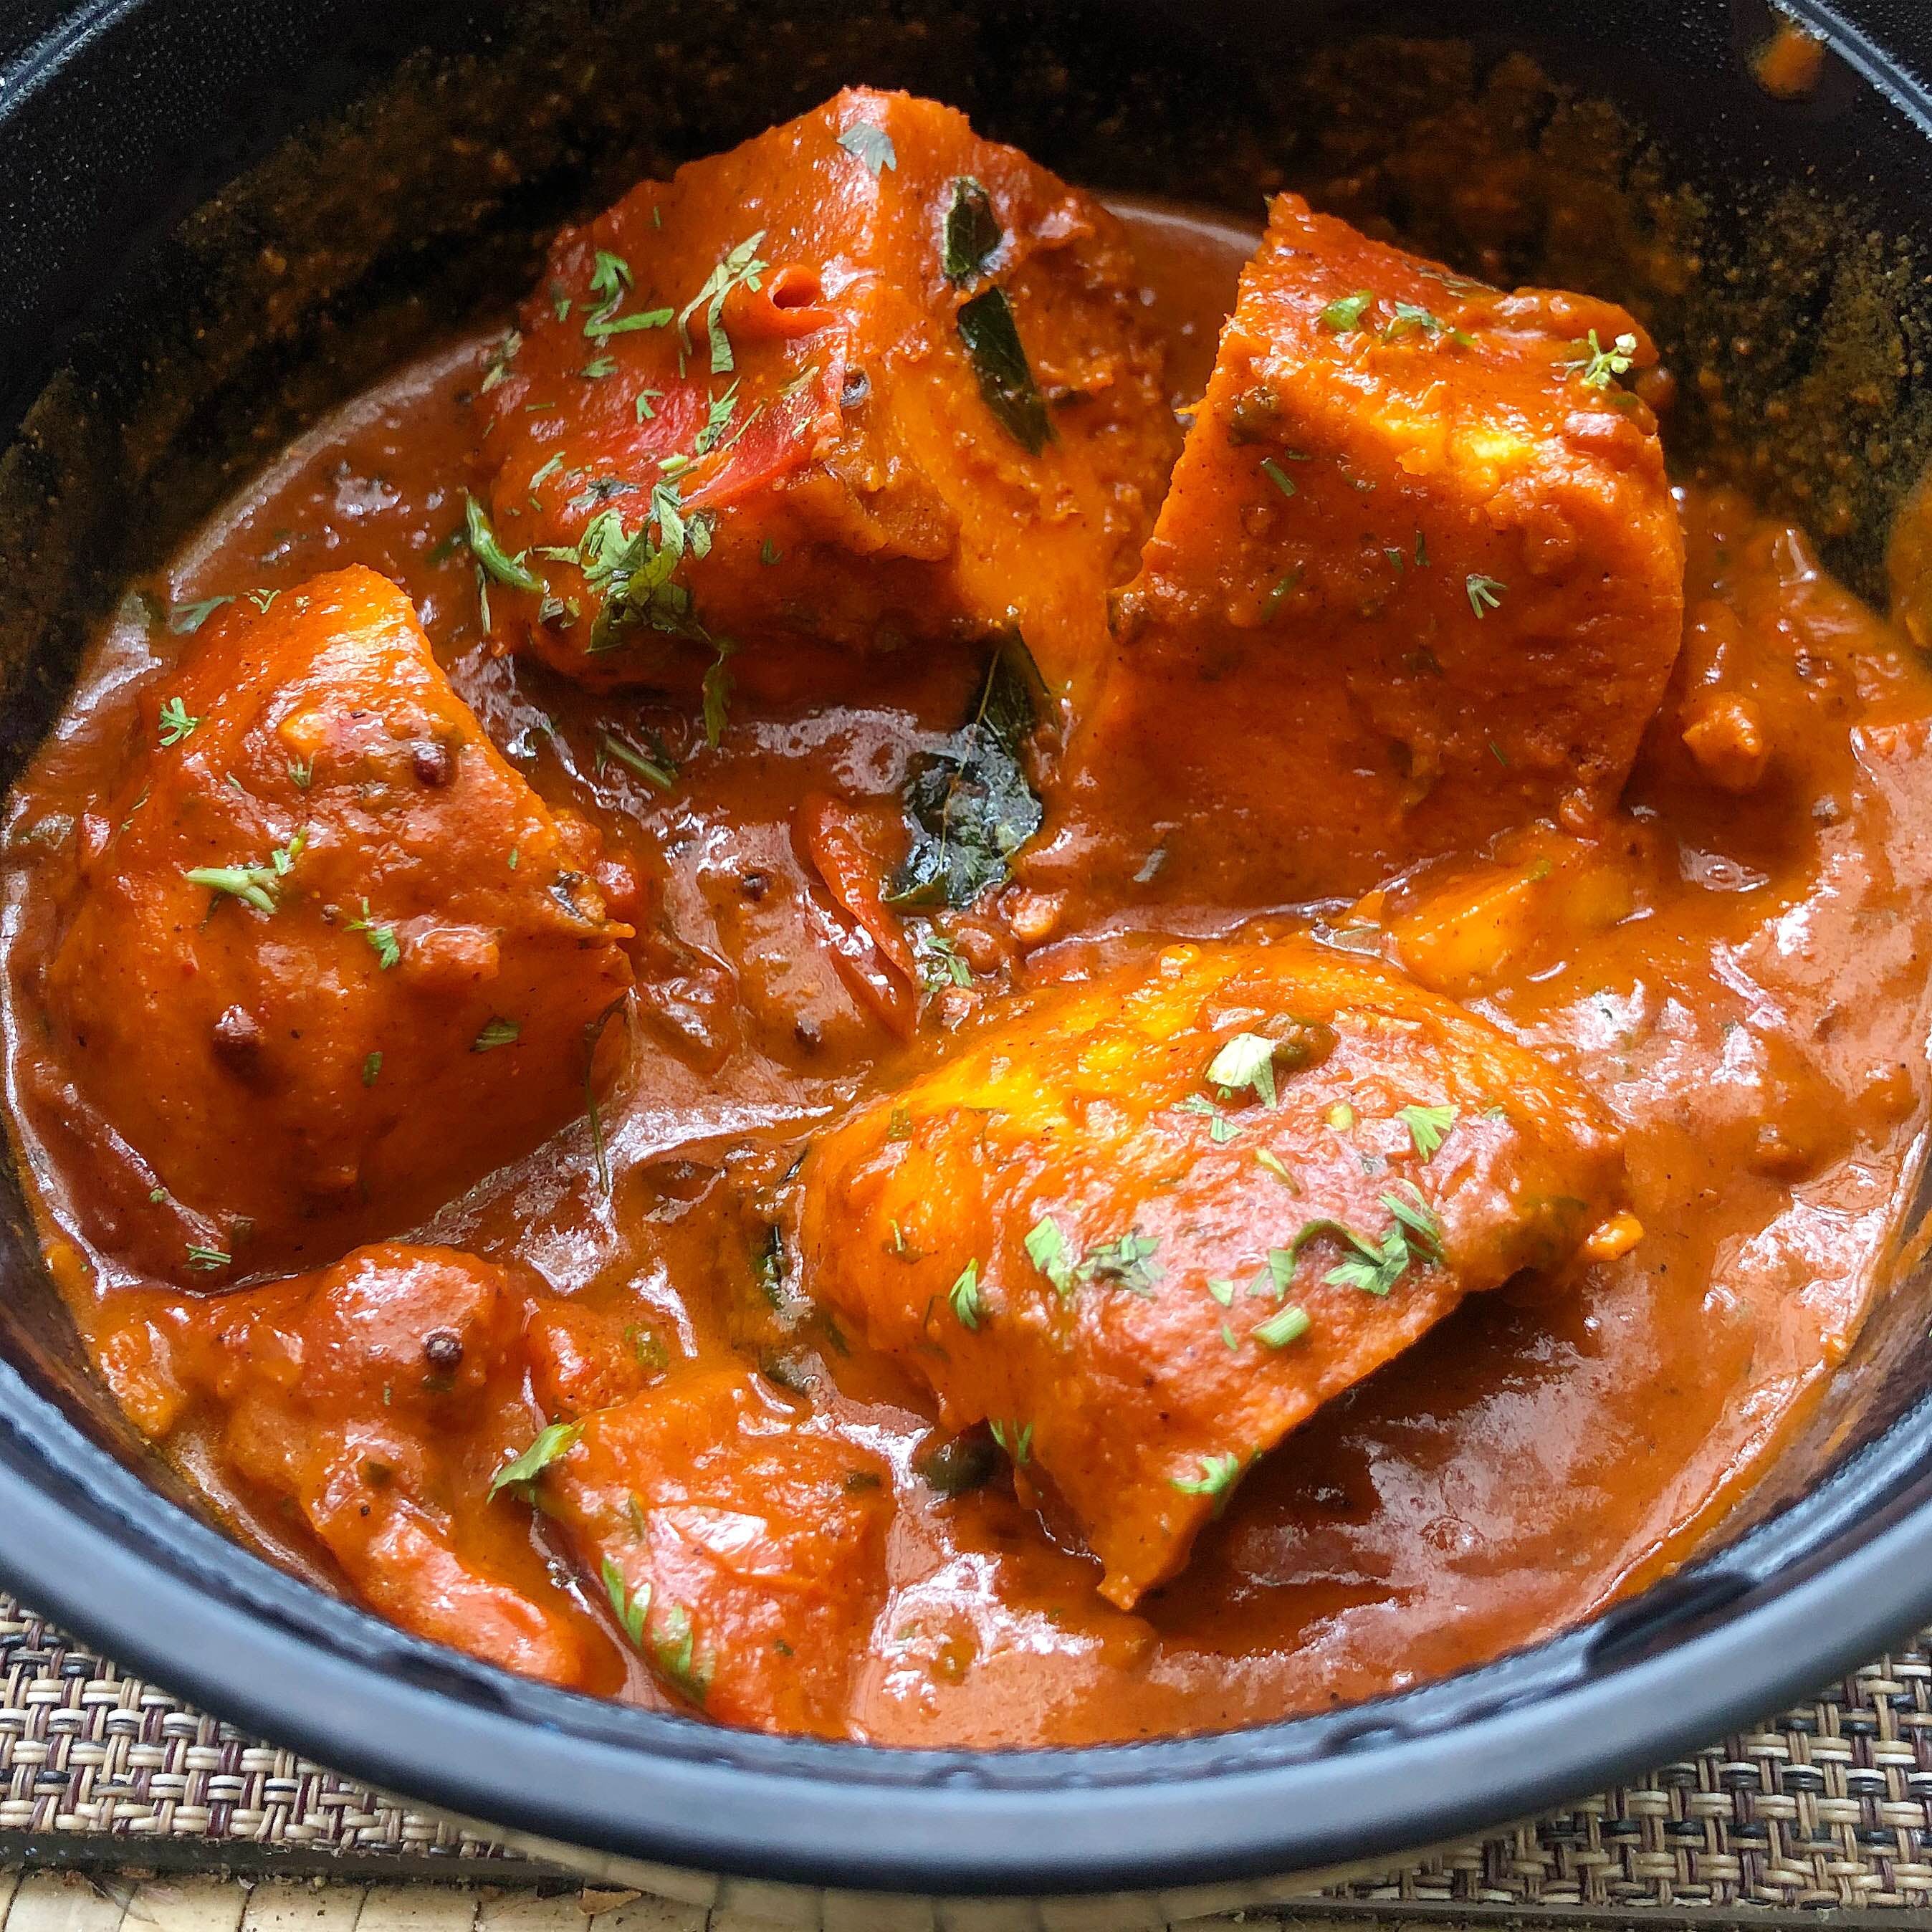 Dish,Food,Cuisine,Meat,Ingredient,Red curry,Gravy,Curry,Dopiaza,Vindaloo